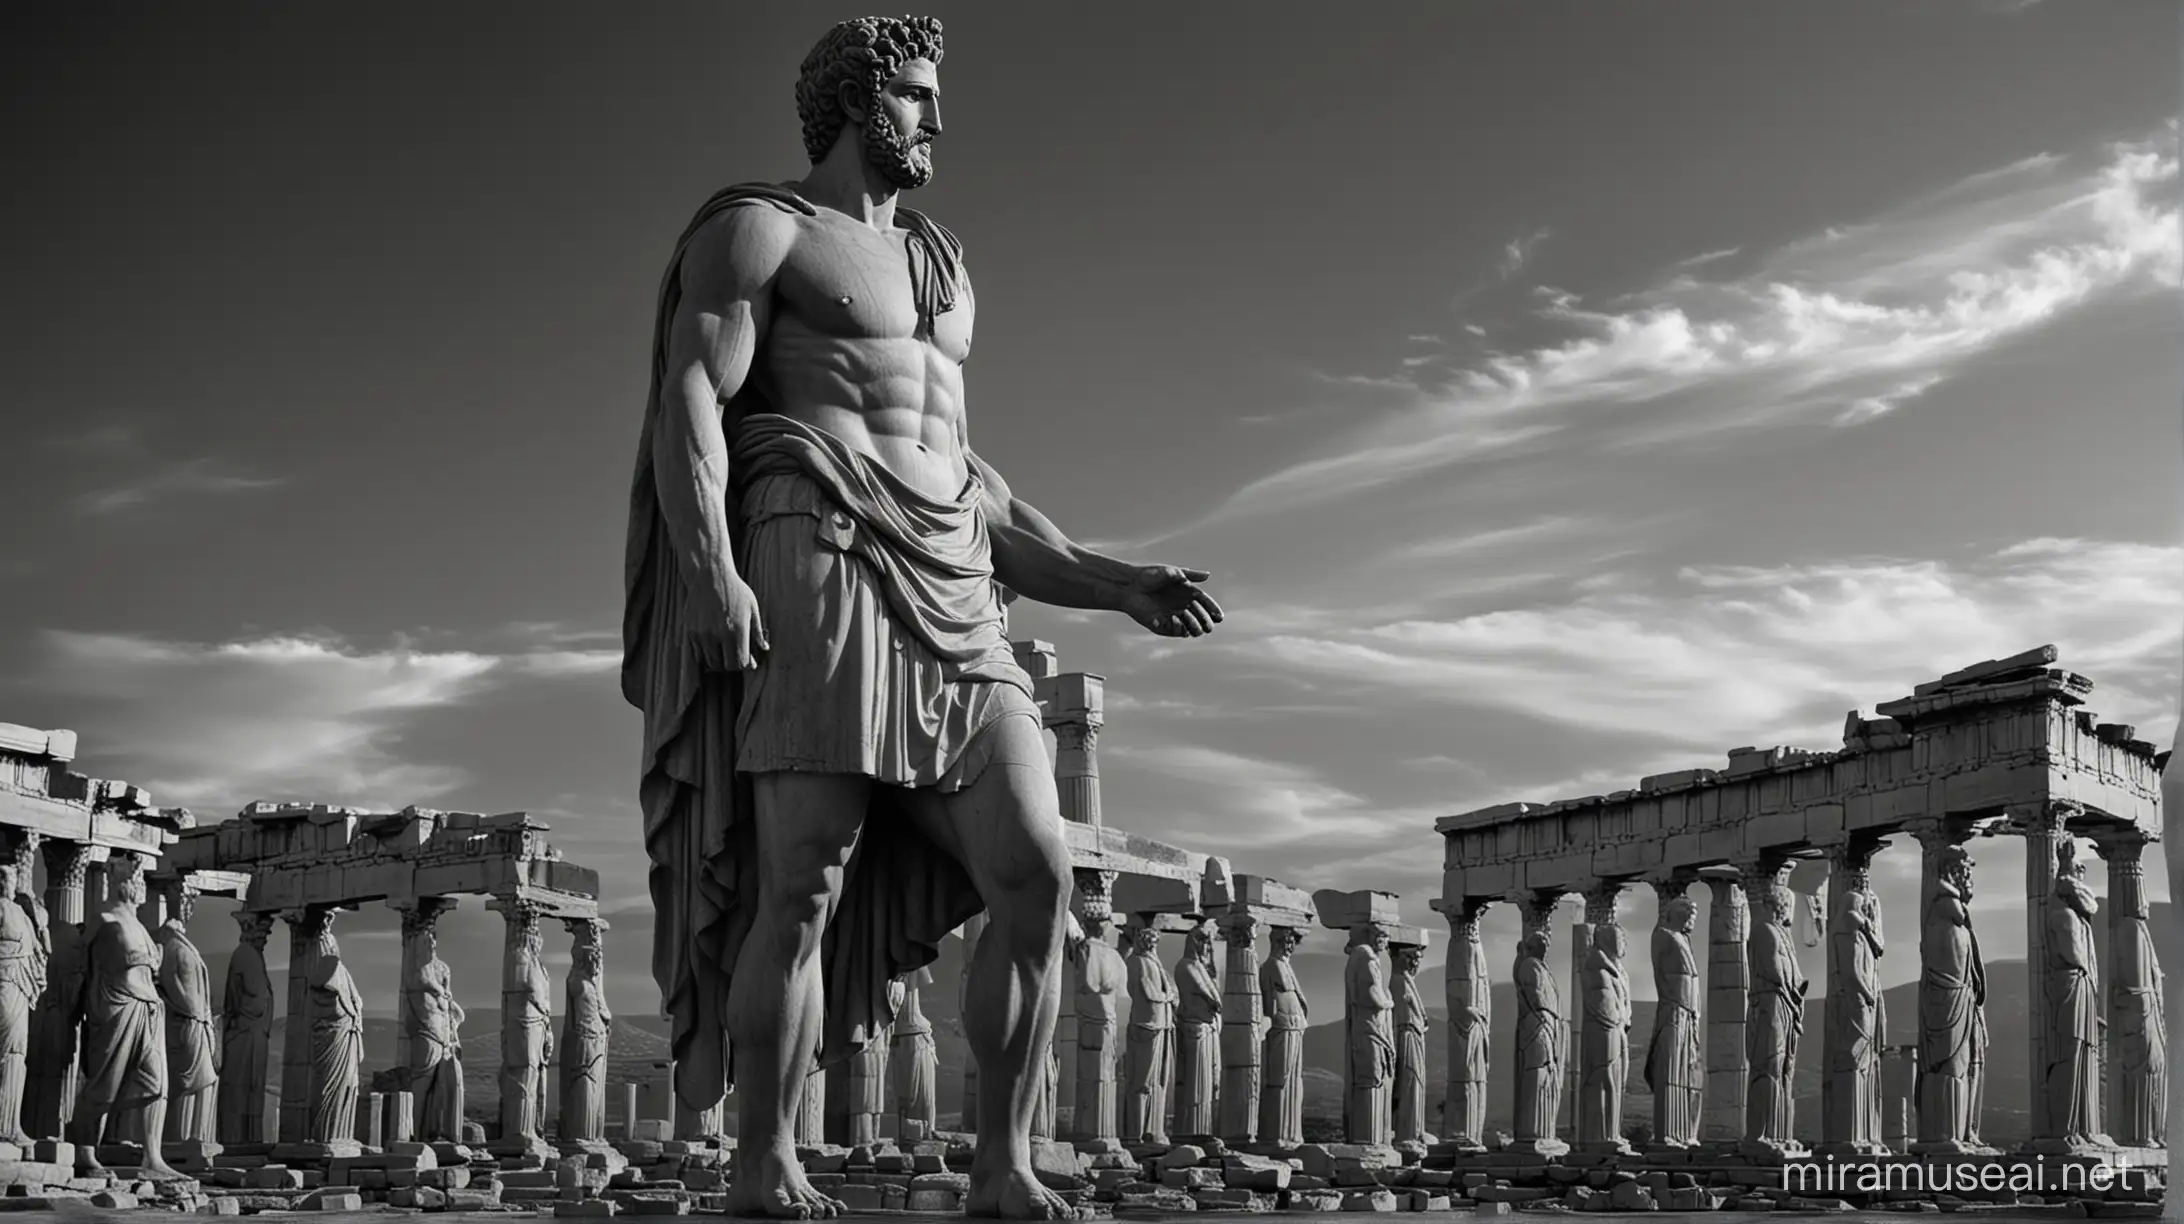  dark landscape image of an ancient greek society deeply connected to stoicism, black and white, ancient greek architecture, include one single big statue of a stereotypical strong greek man, marcus aurelius --ar 16:9